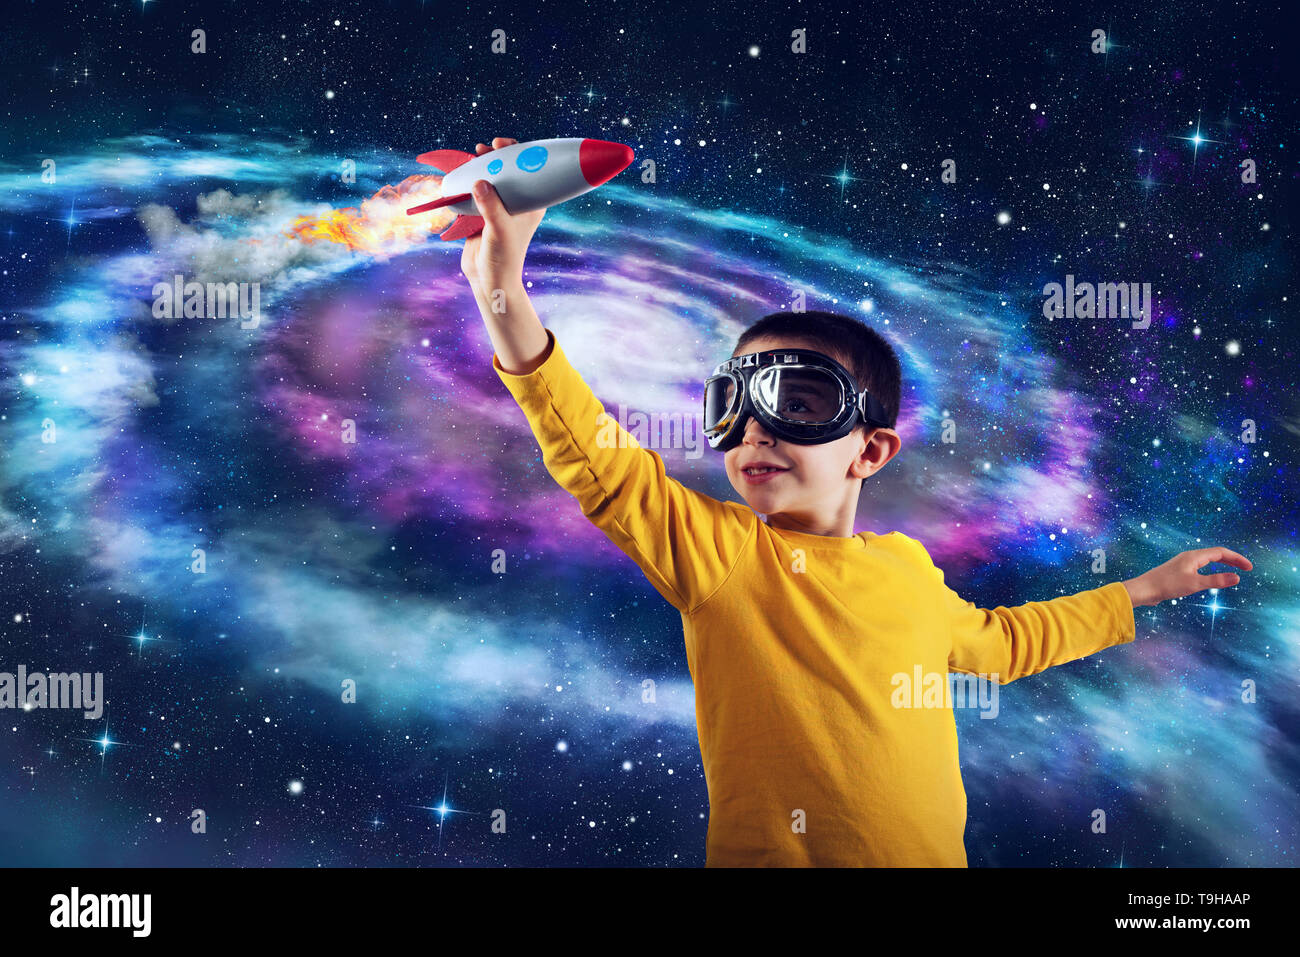 Child plays with a rocket. Concept of imagination Stock Photo